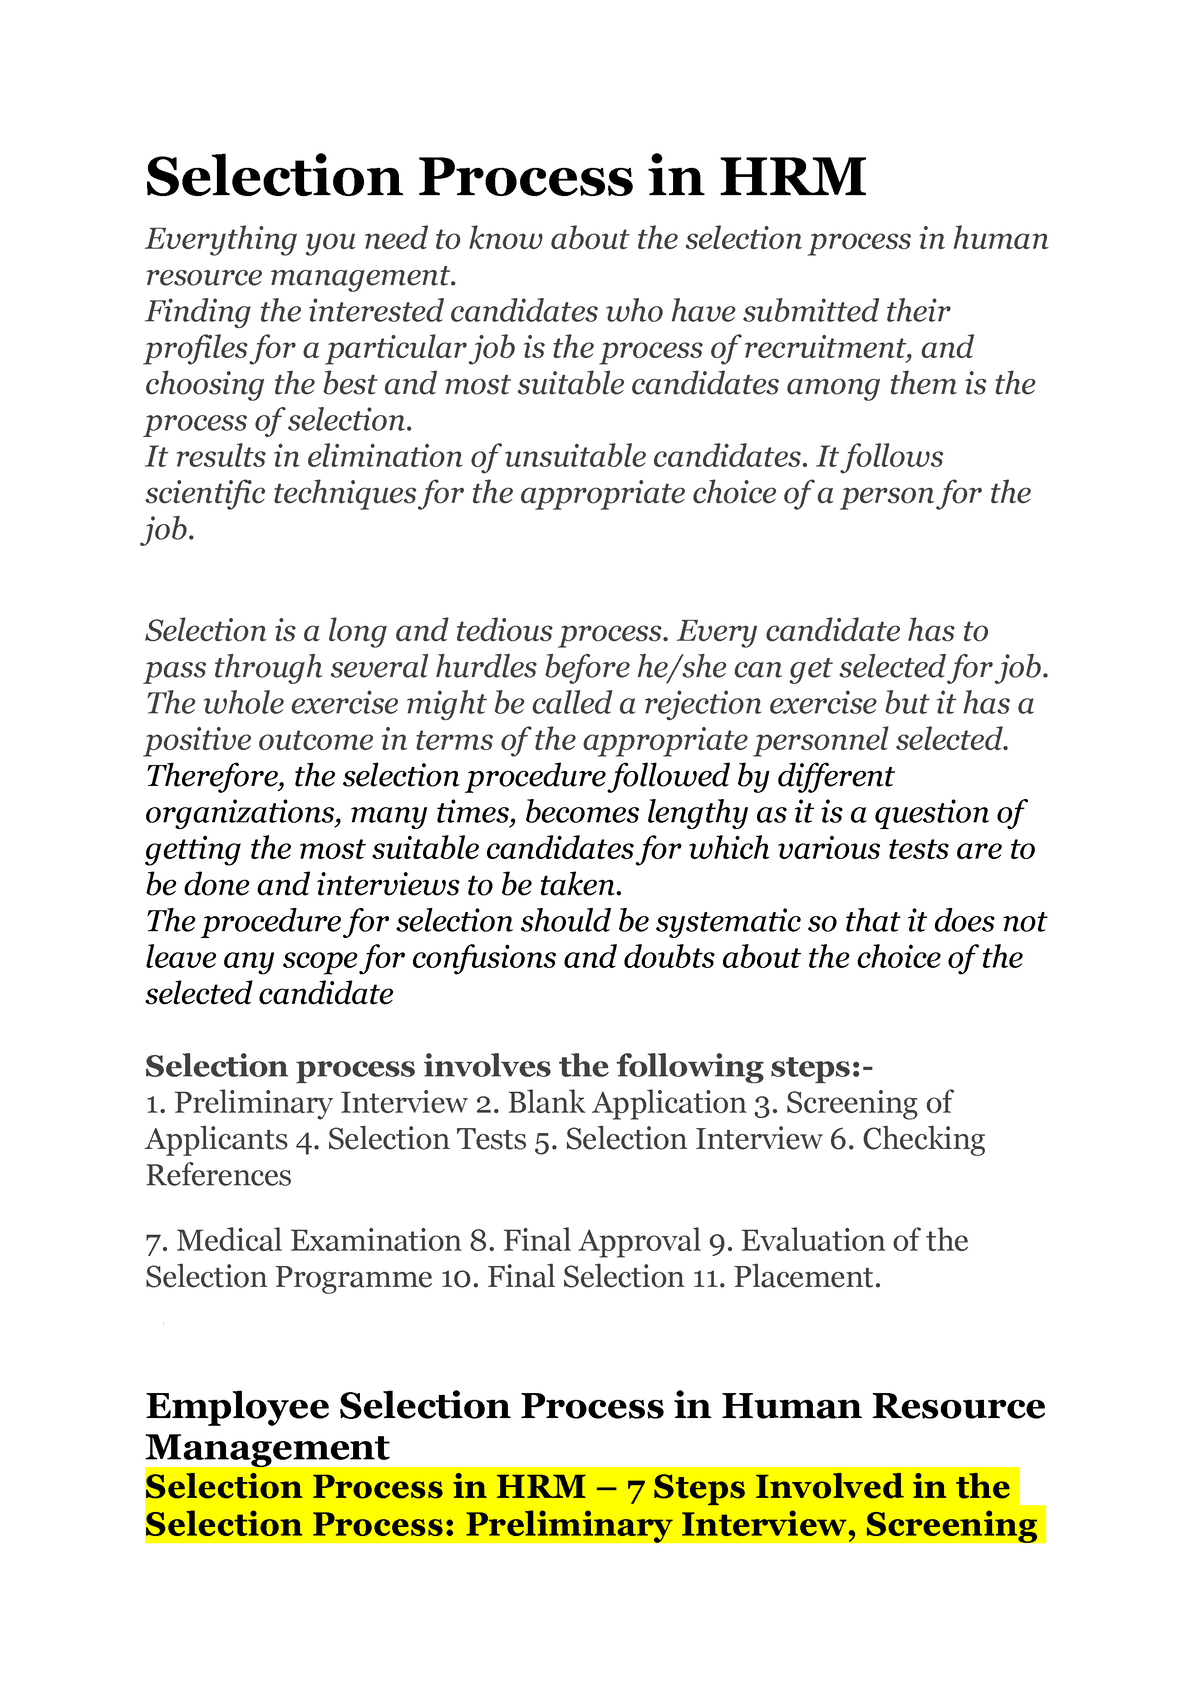 case study on selection process in hrm pdf